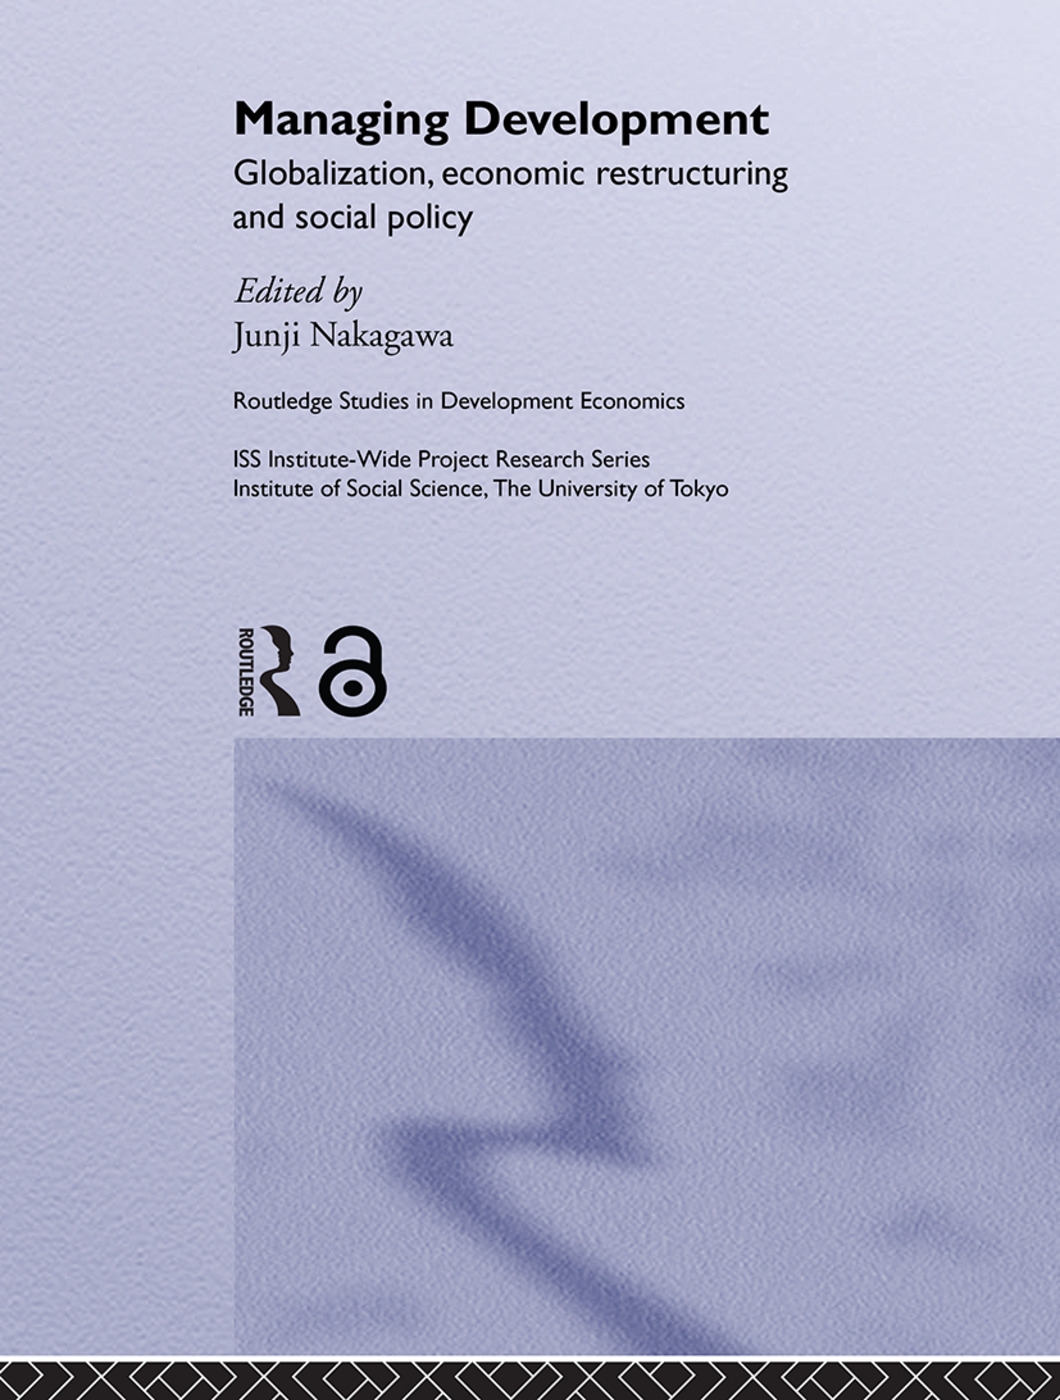 Managing Development: Globalization, Economic Restructuring, And Social Policy